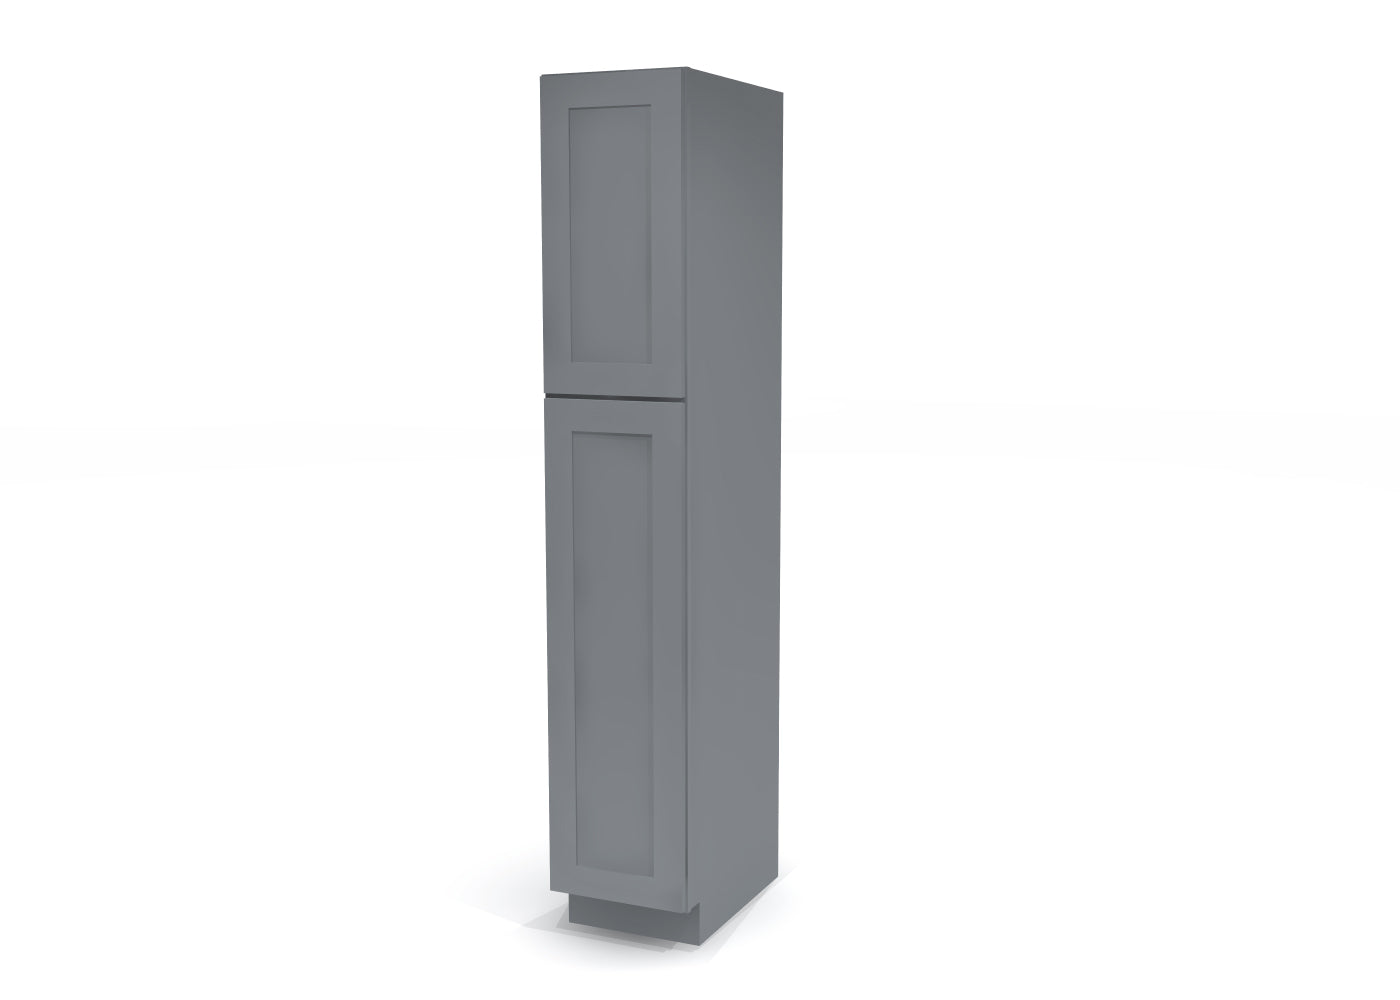 Utility Pantry Single Door 84" by 15" Wide Gray Shaker Cabinet